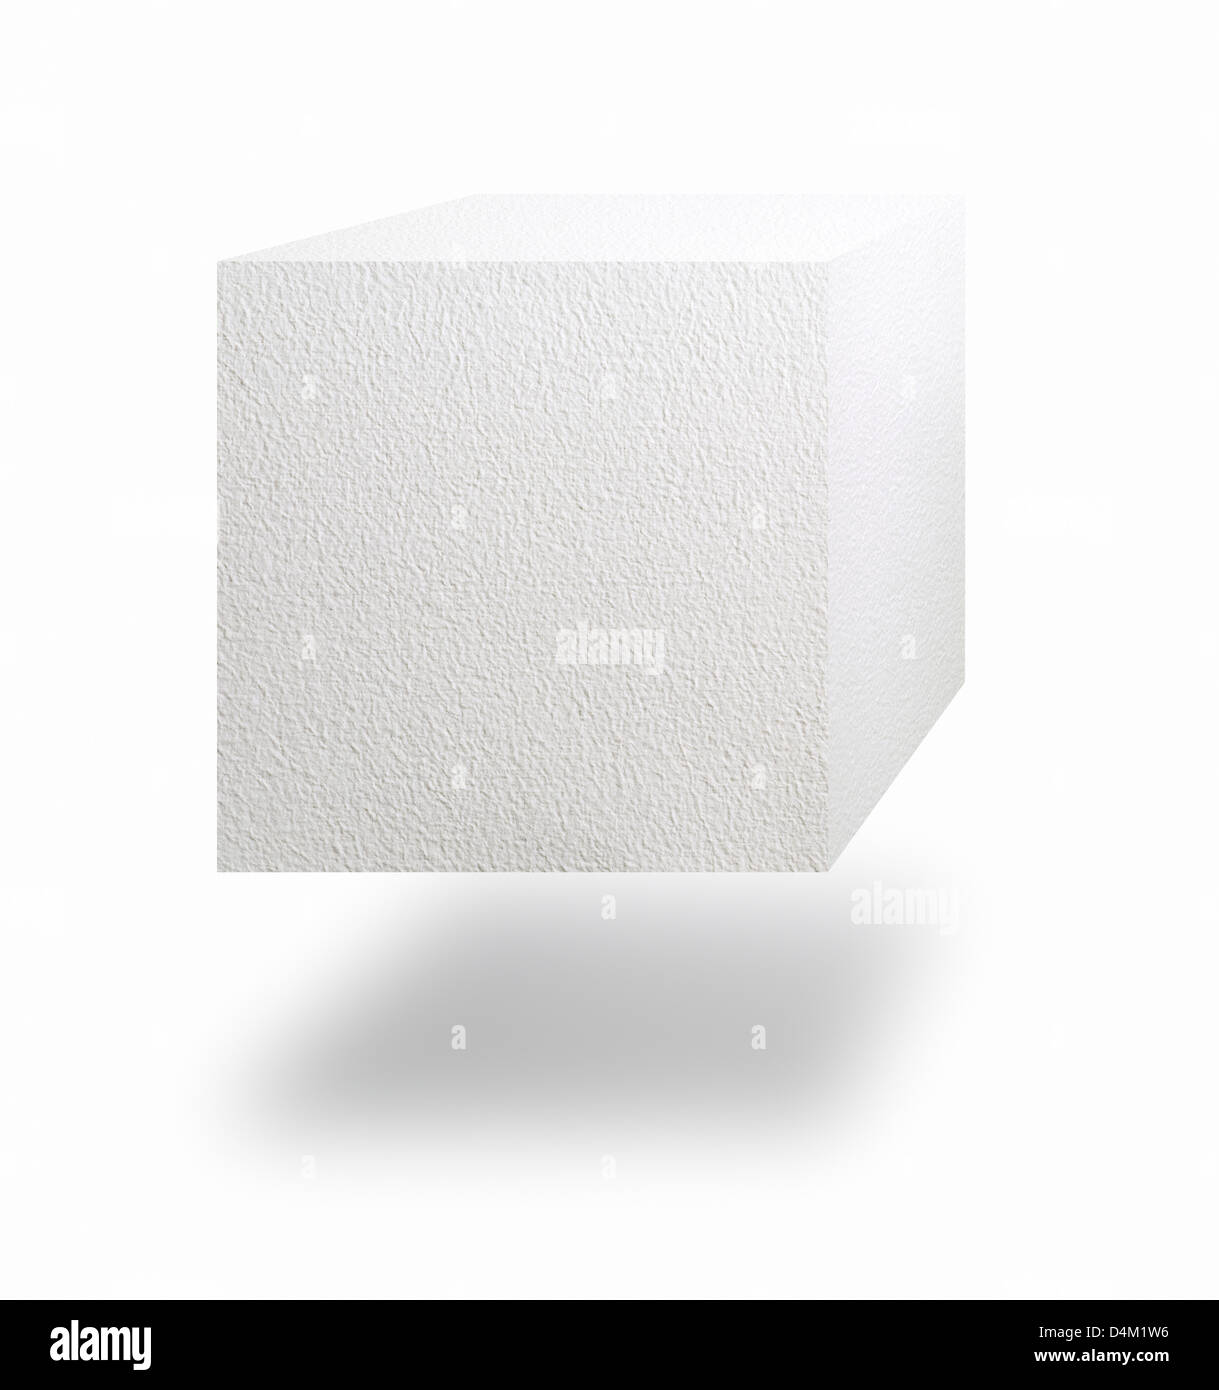 Paper cube floating in air over white background Stock Photo